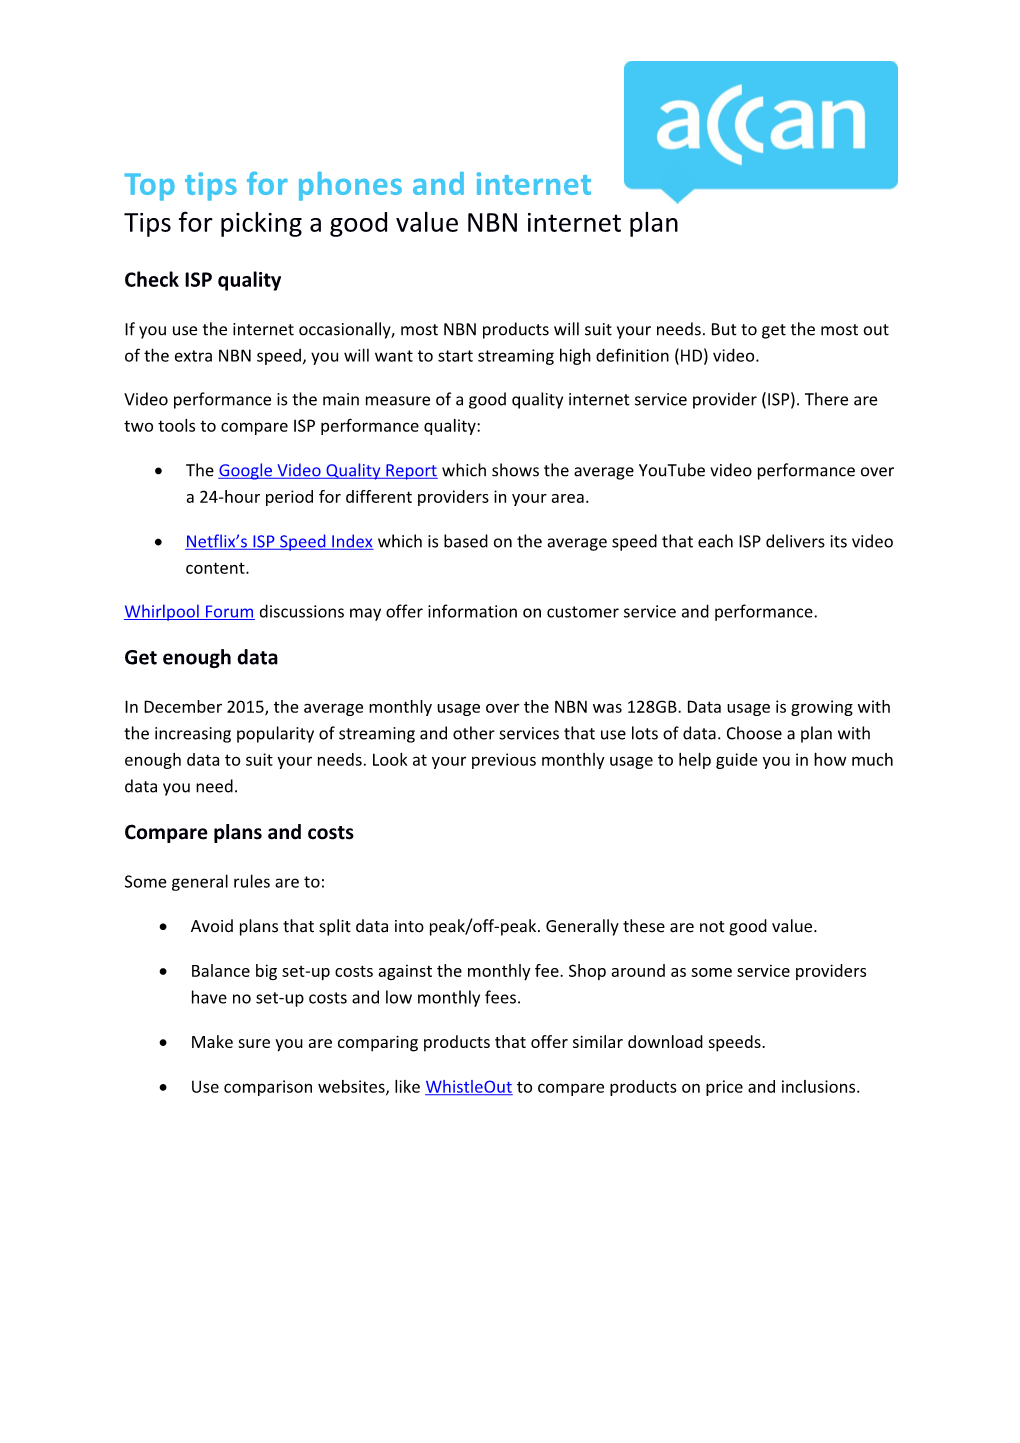 Tips for Picking a Good Value NBN Internet Plan